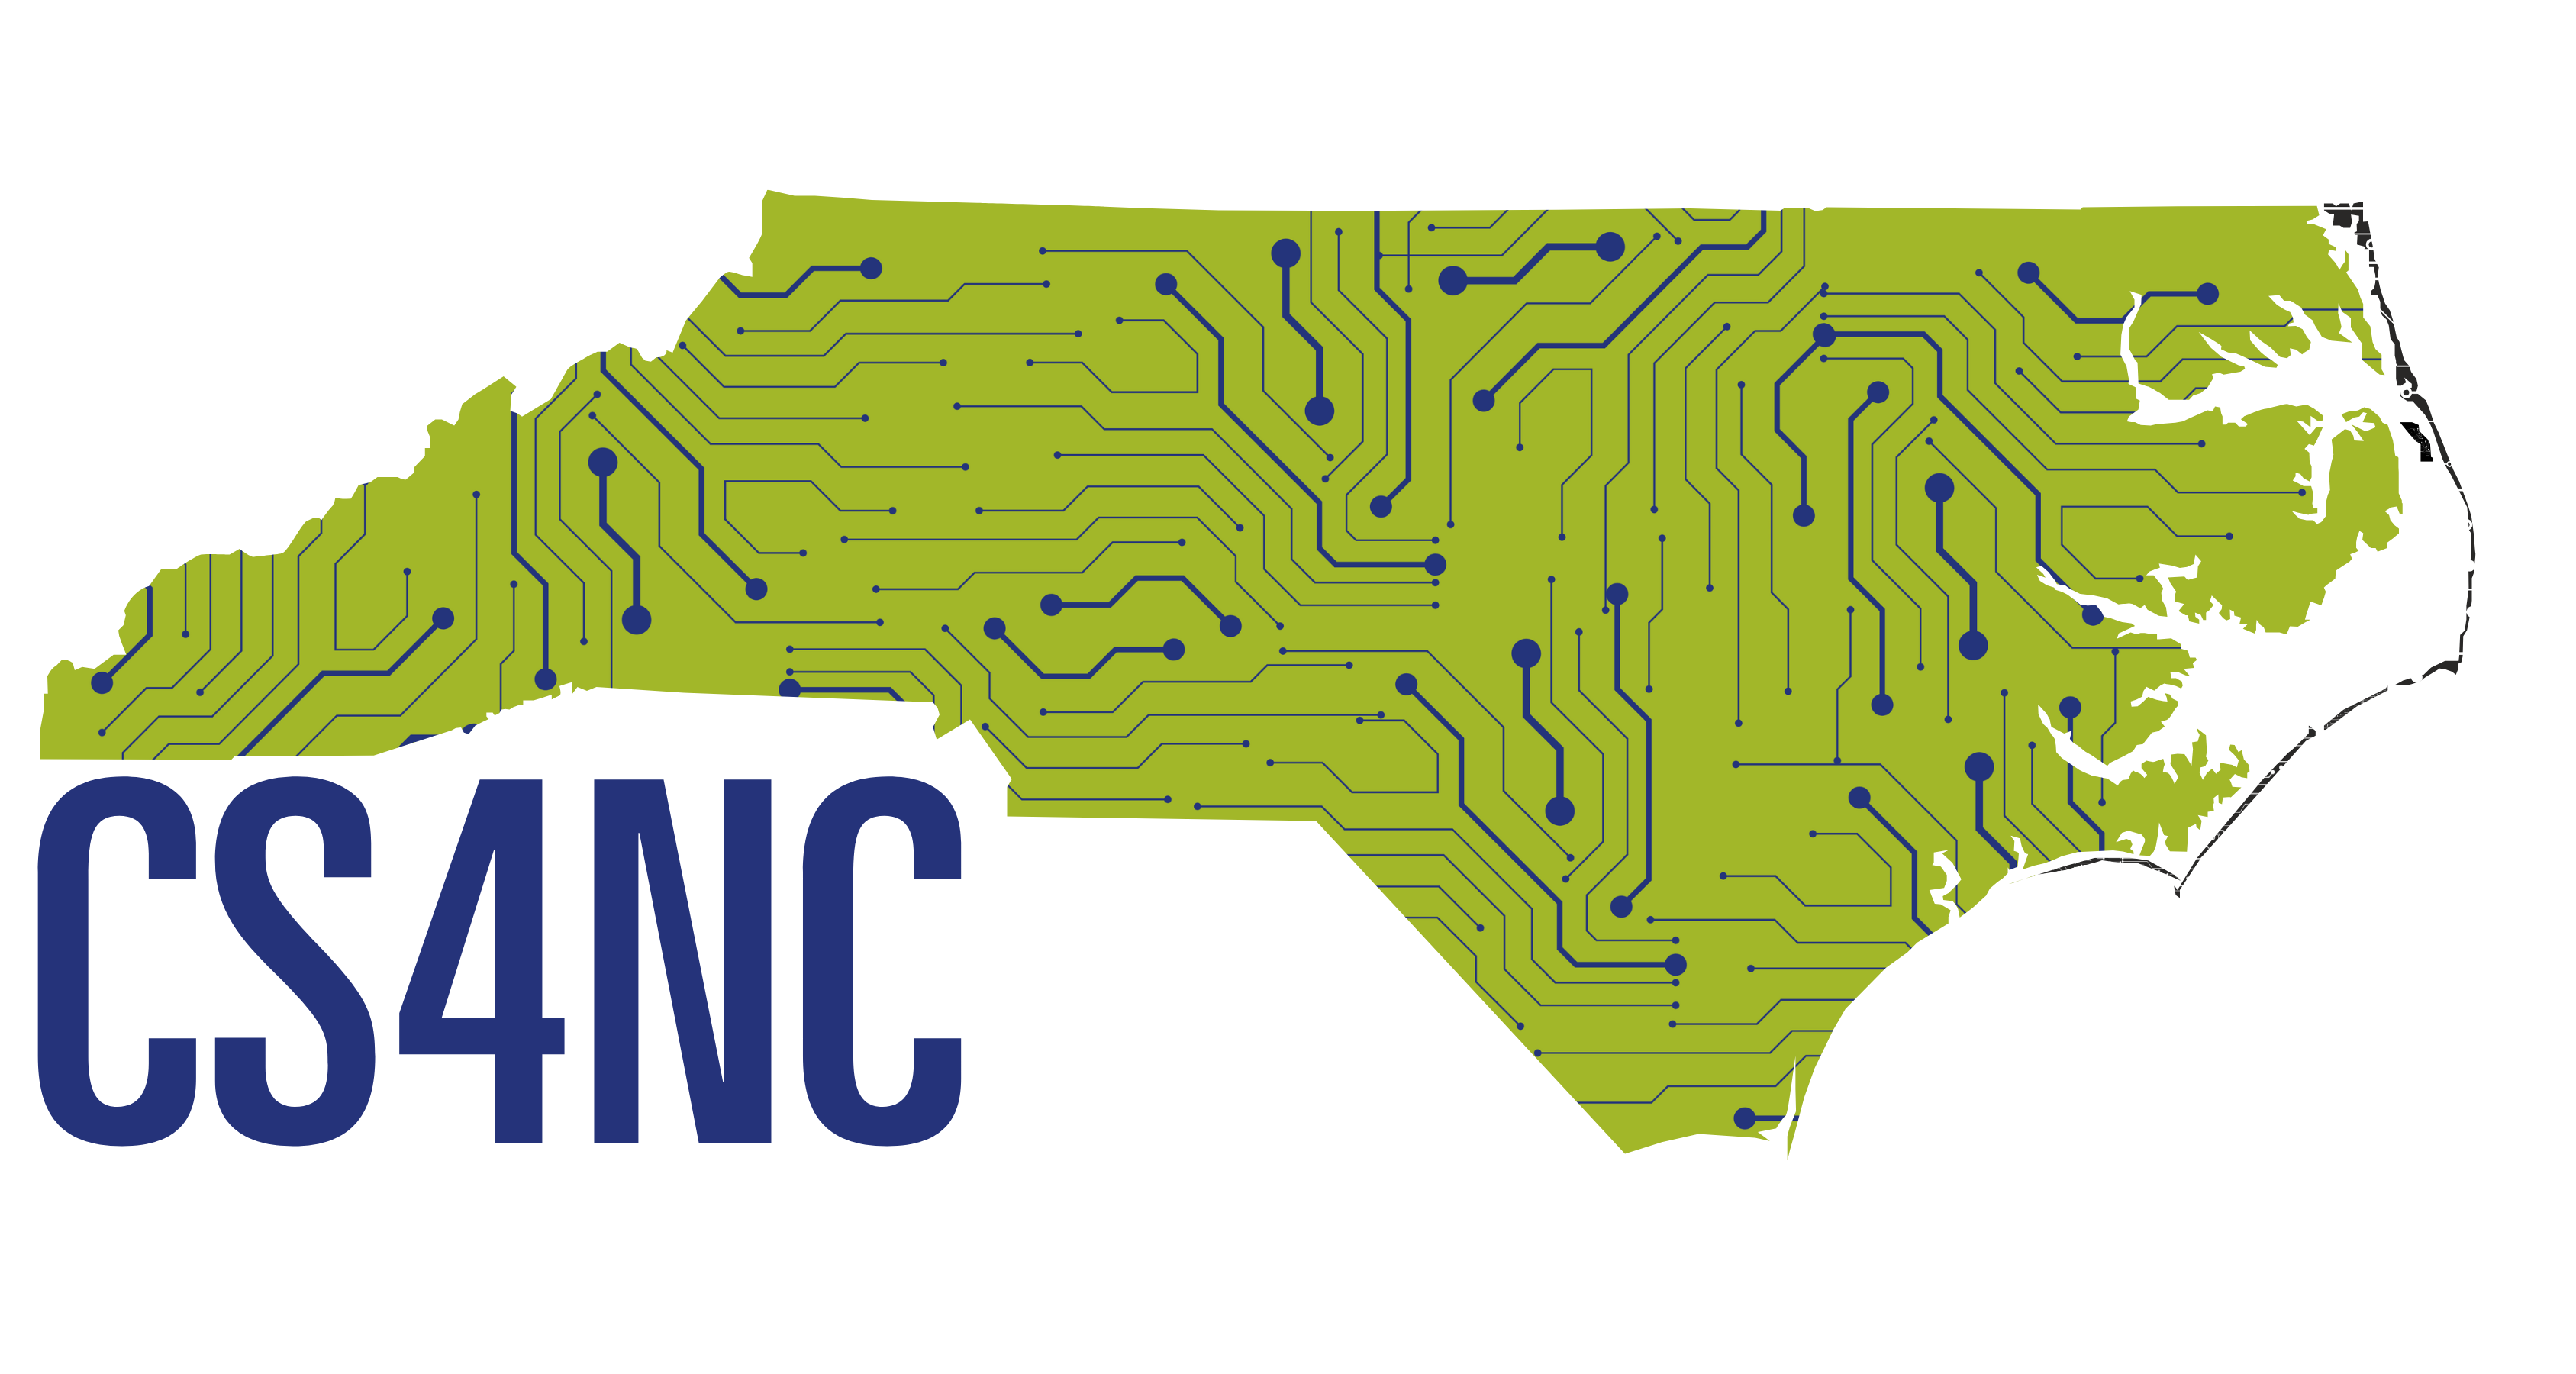 CS4NC logo features an outline of North Carolina with circuitry woven throughout the state